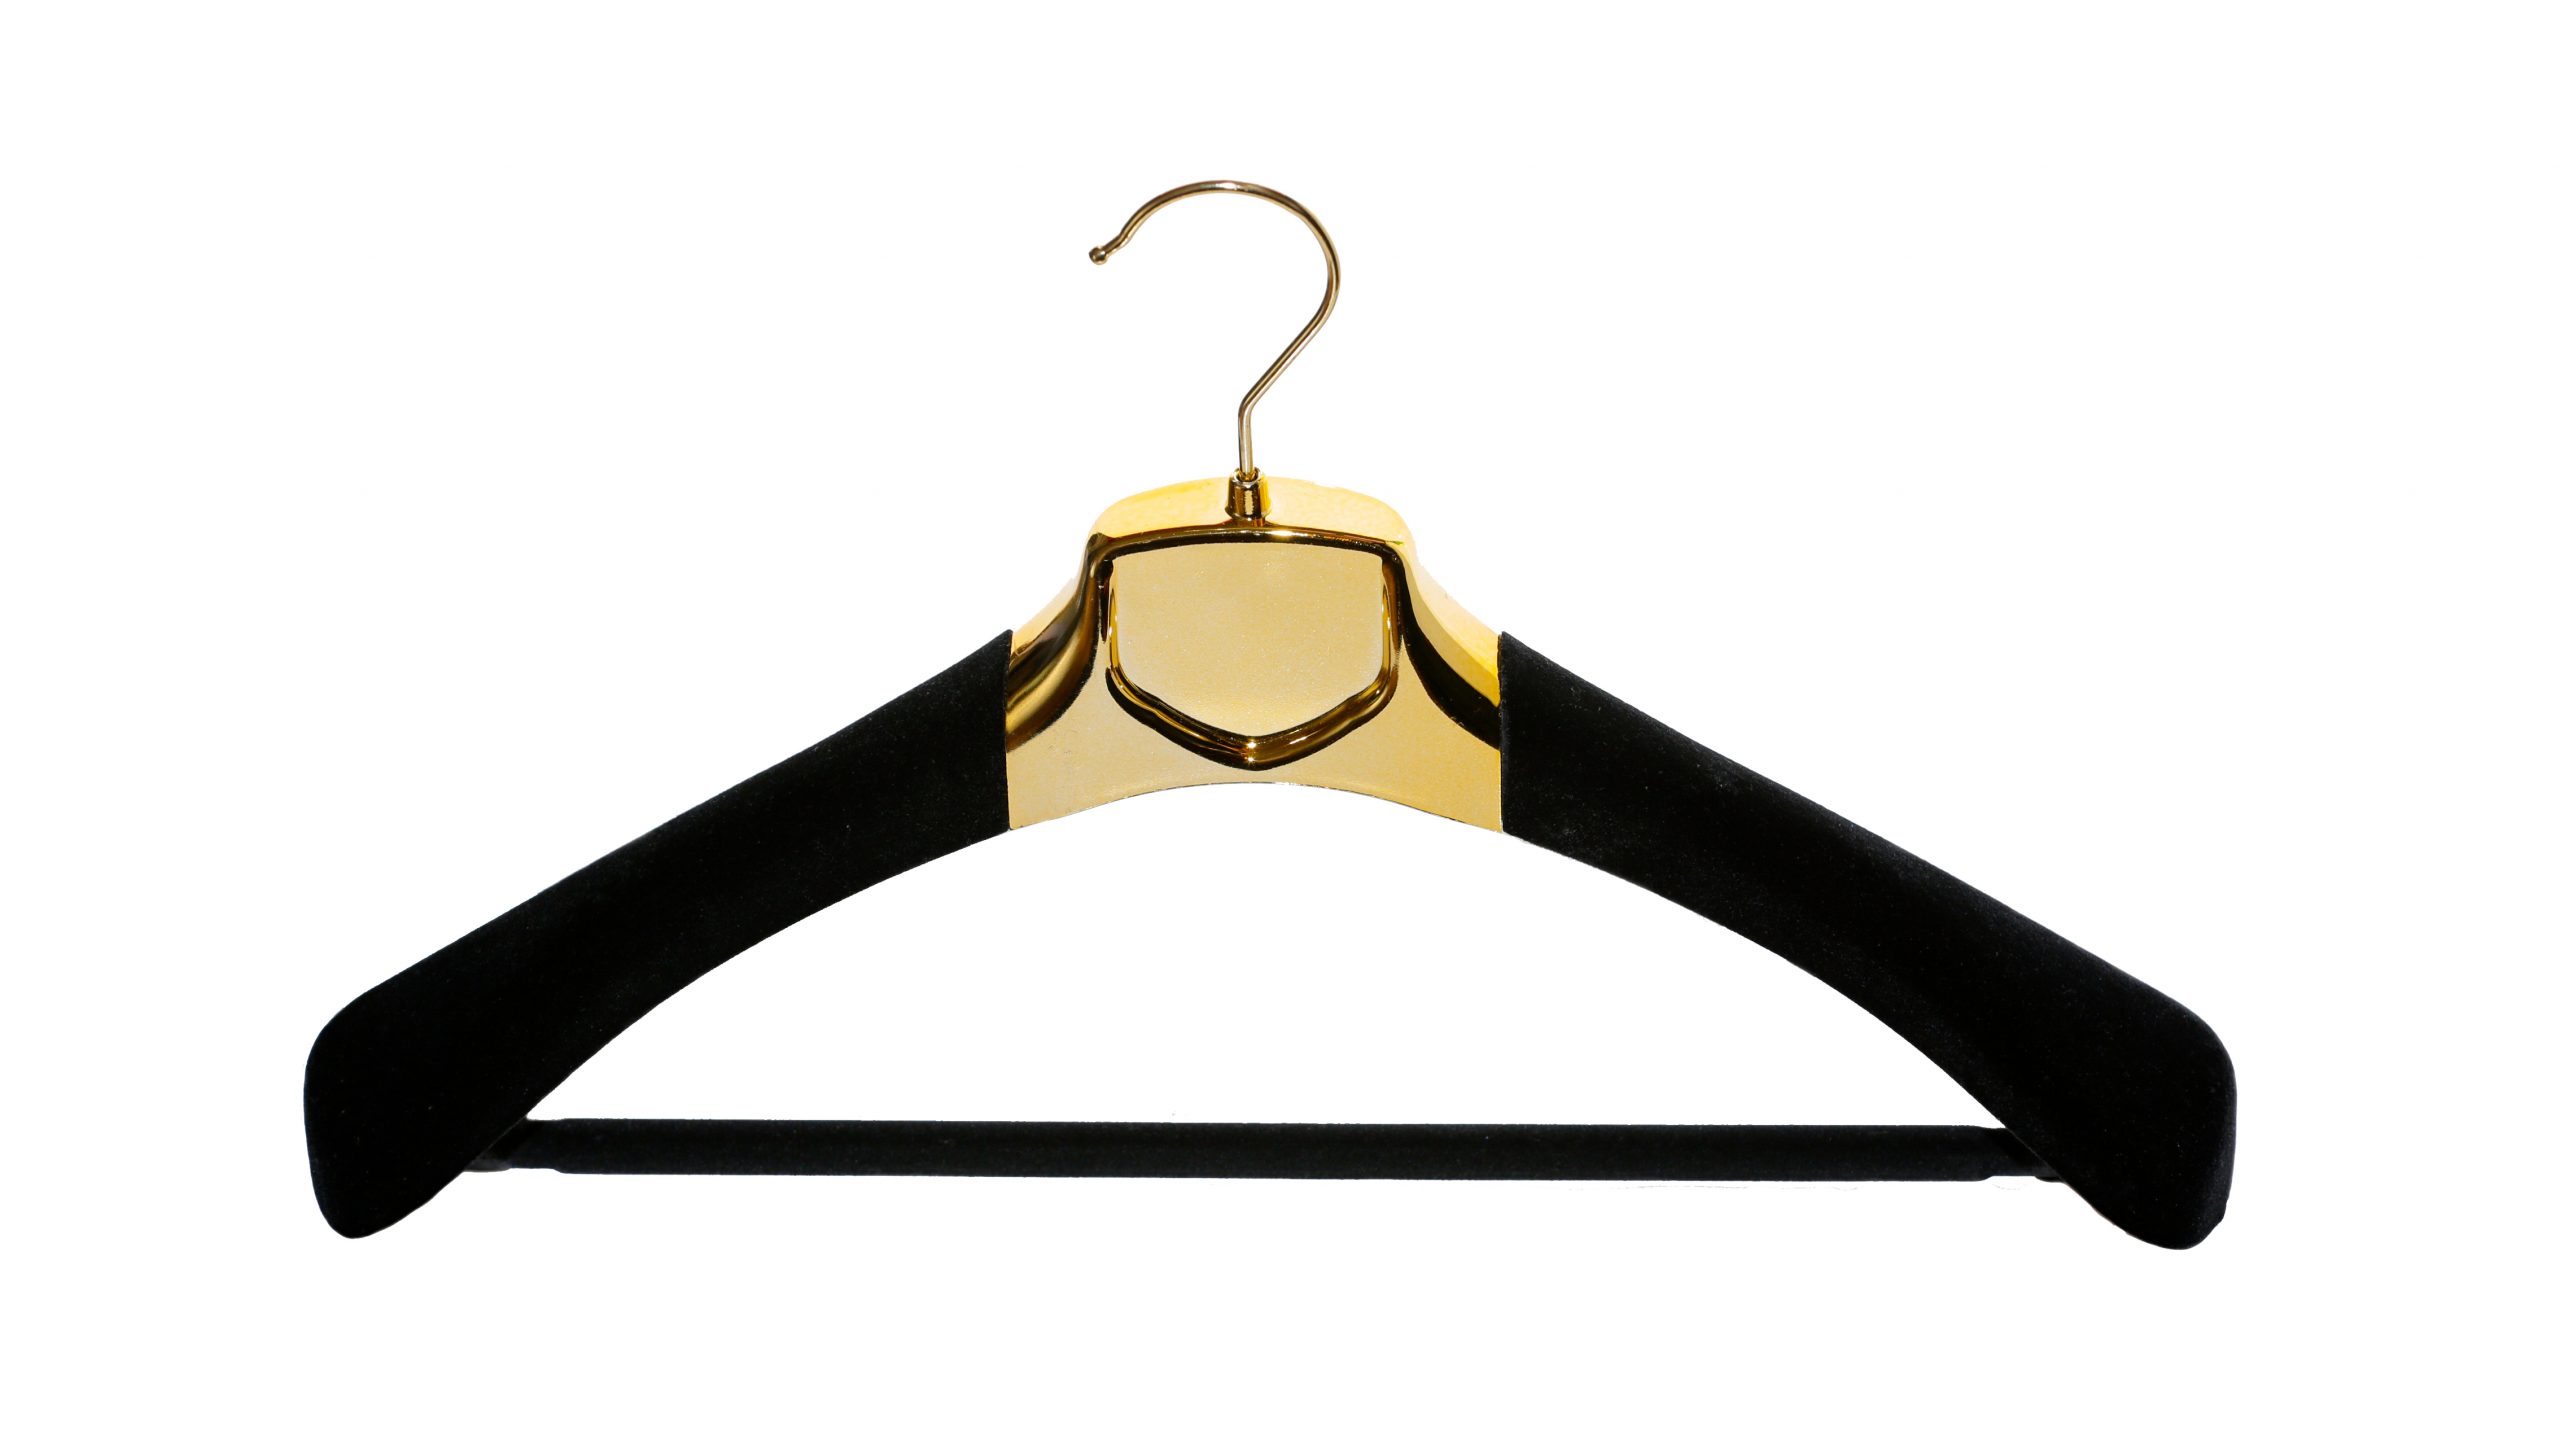 Velvet Gold and Black Hangers with Trouser Bar - Clothes hangers